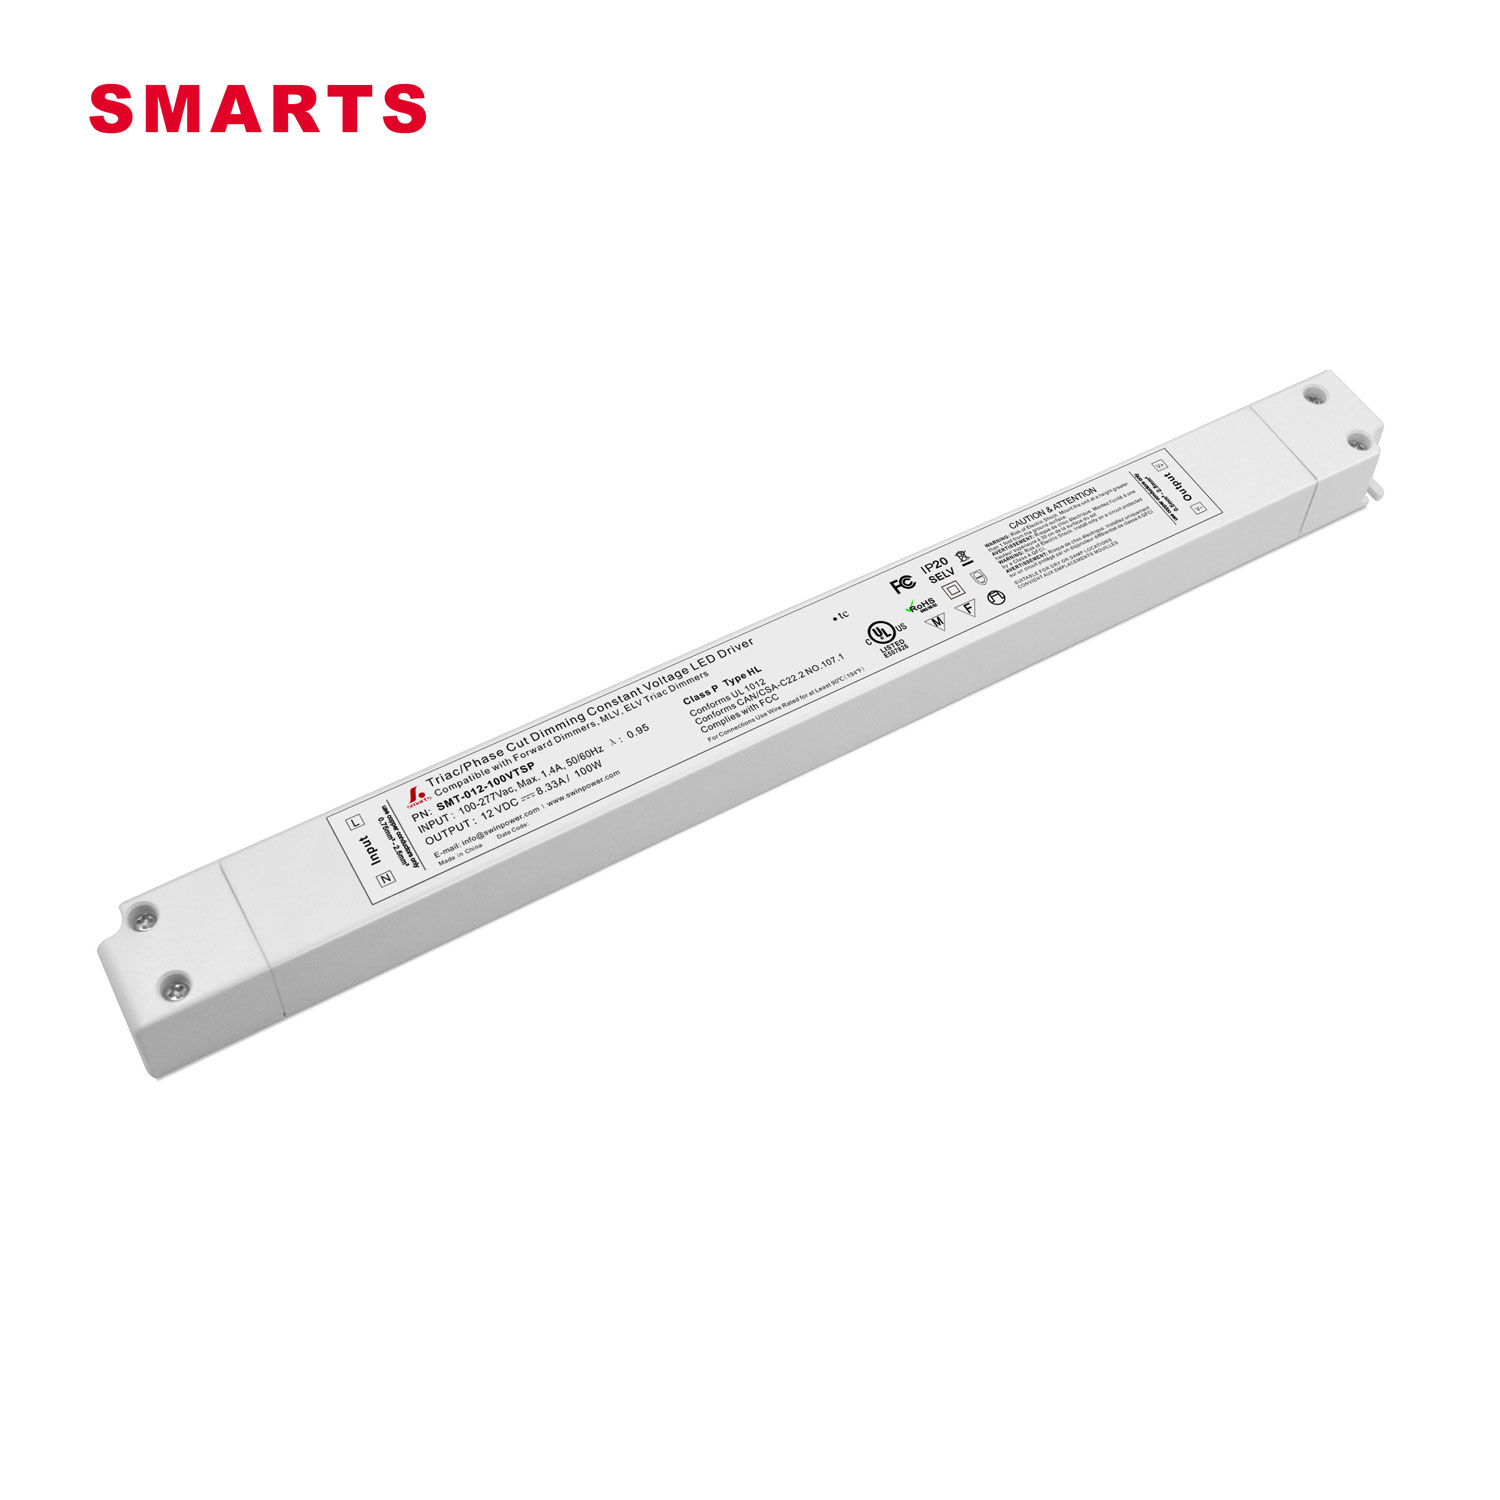 100w triac dimmable led driver